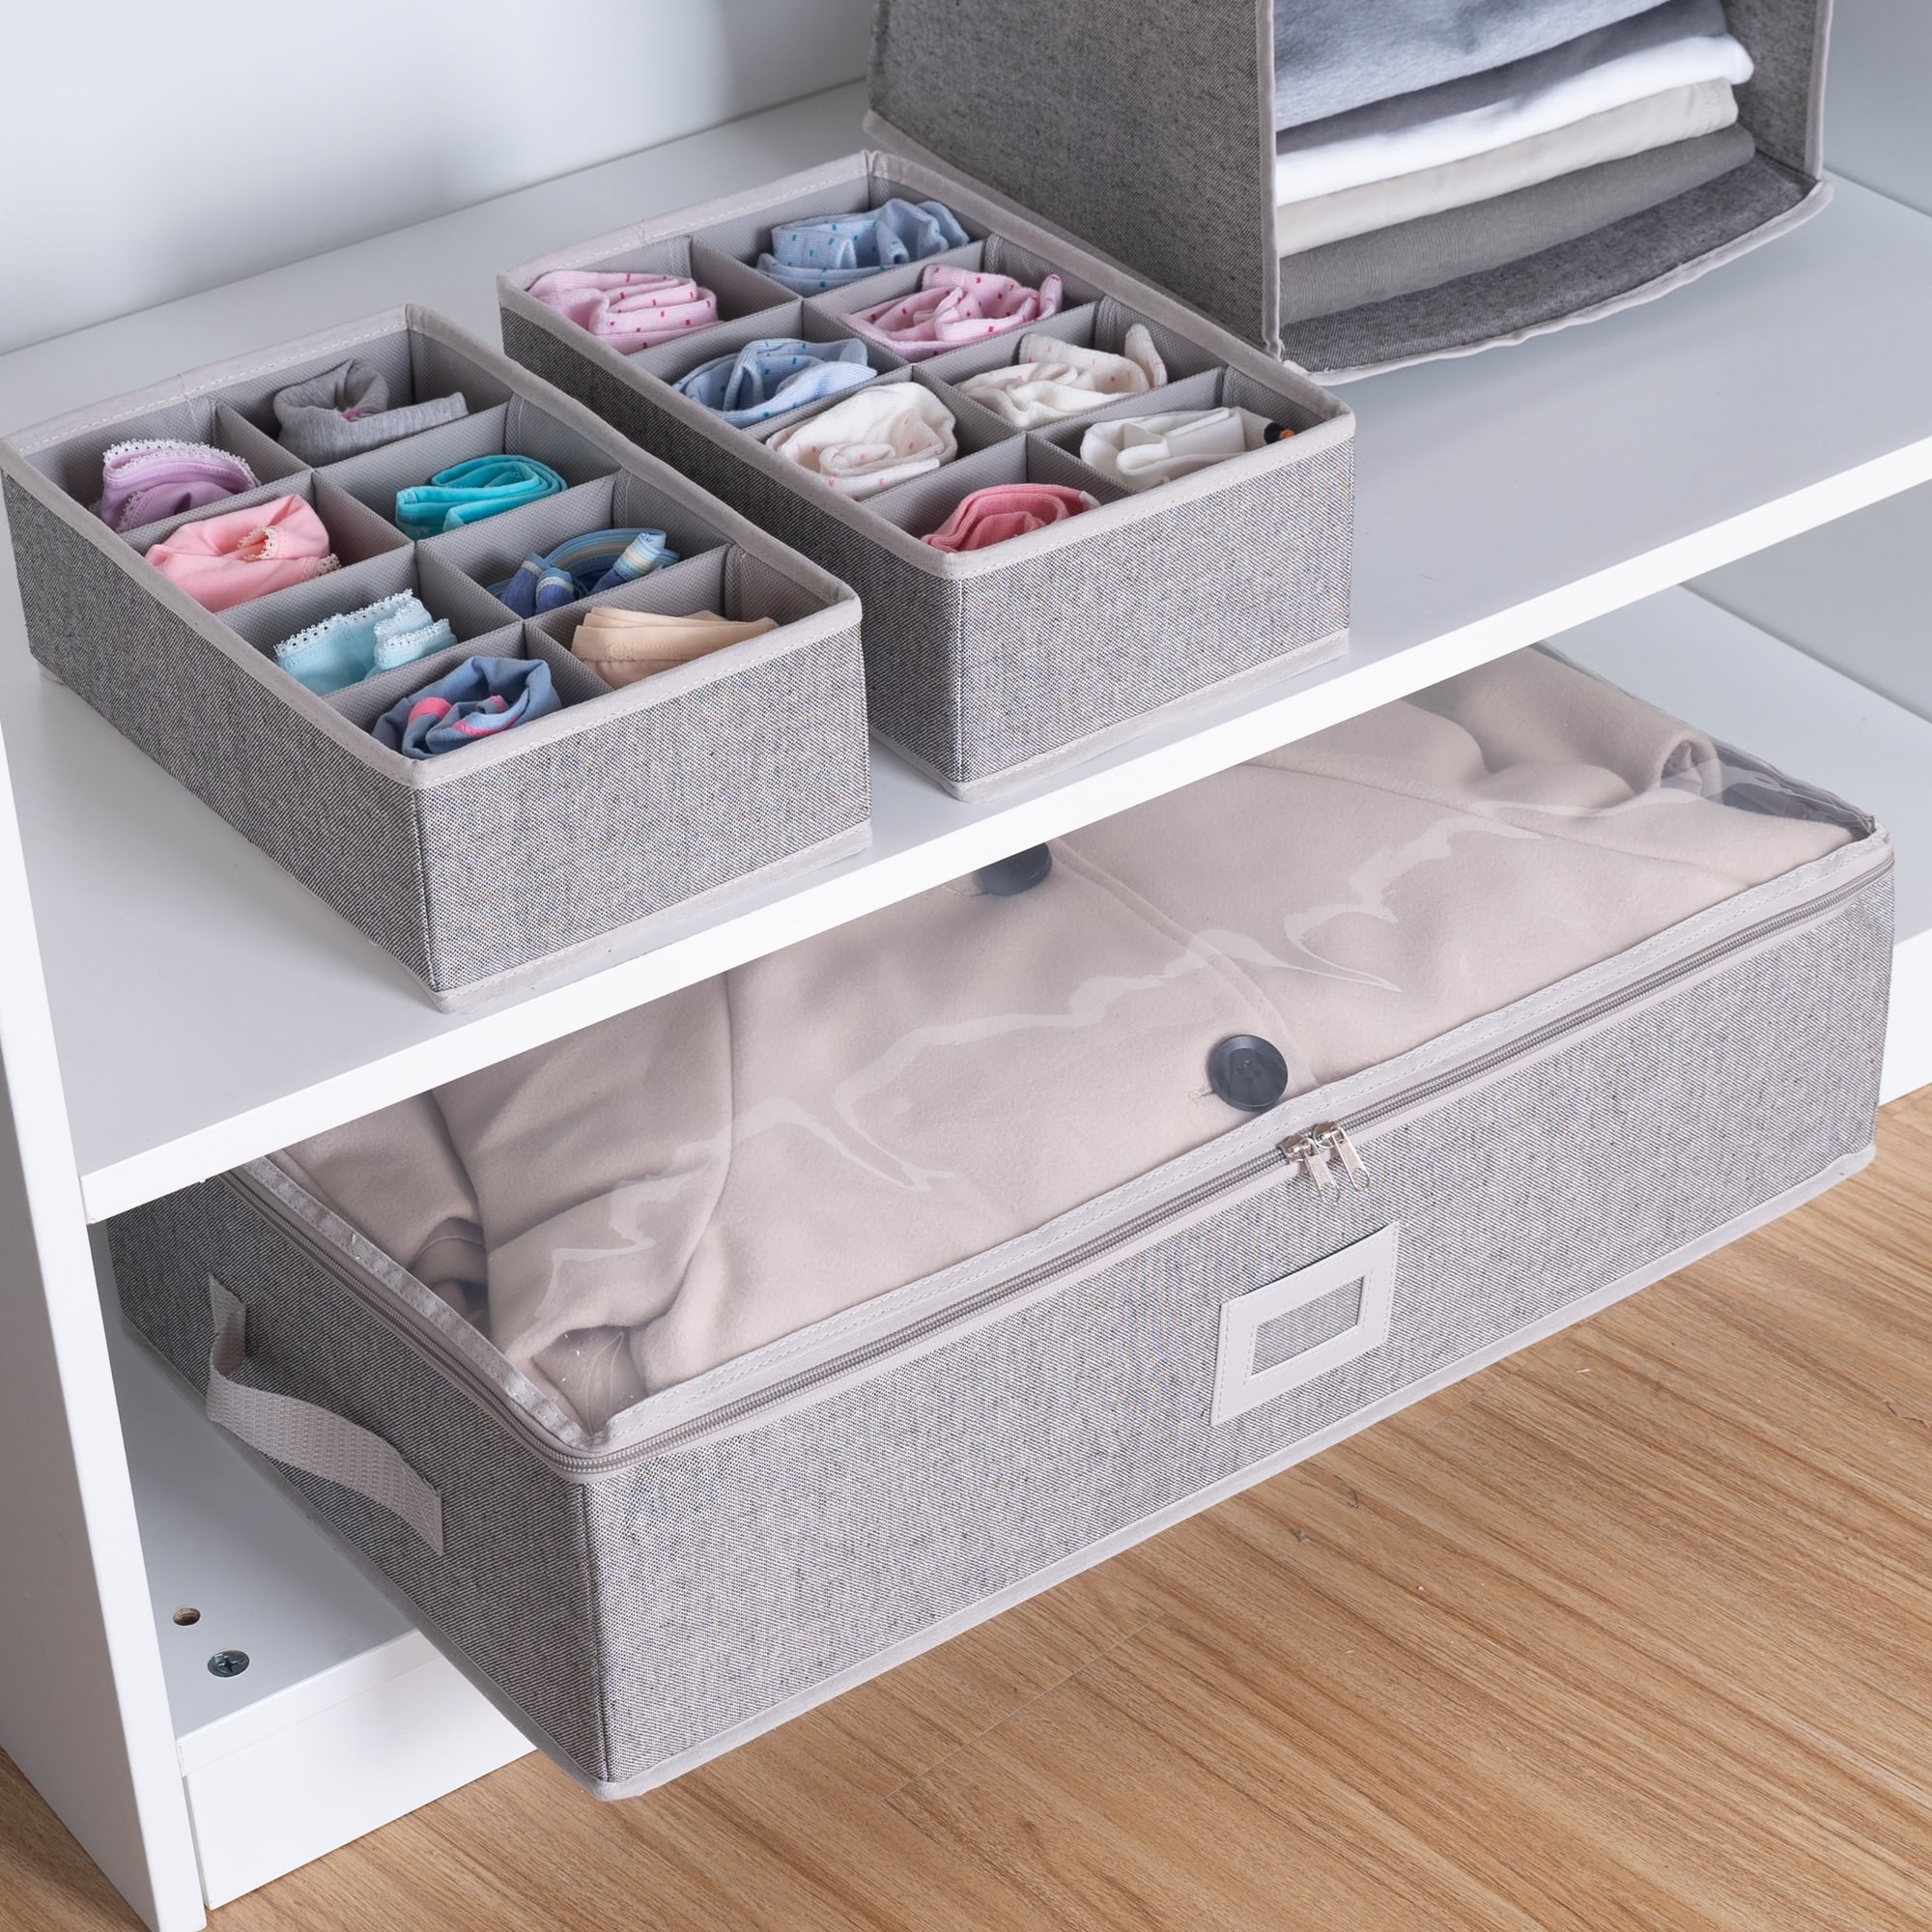 3 gray under bed storage bins with dividers